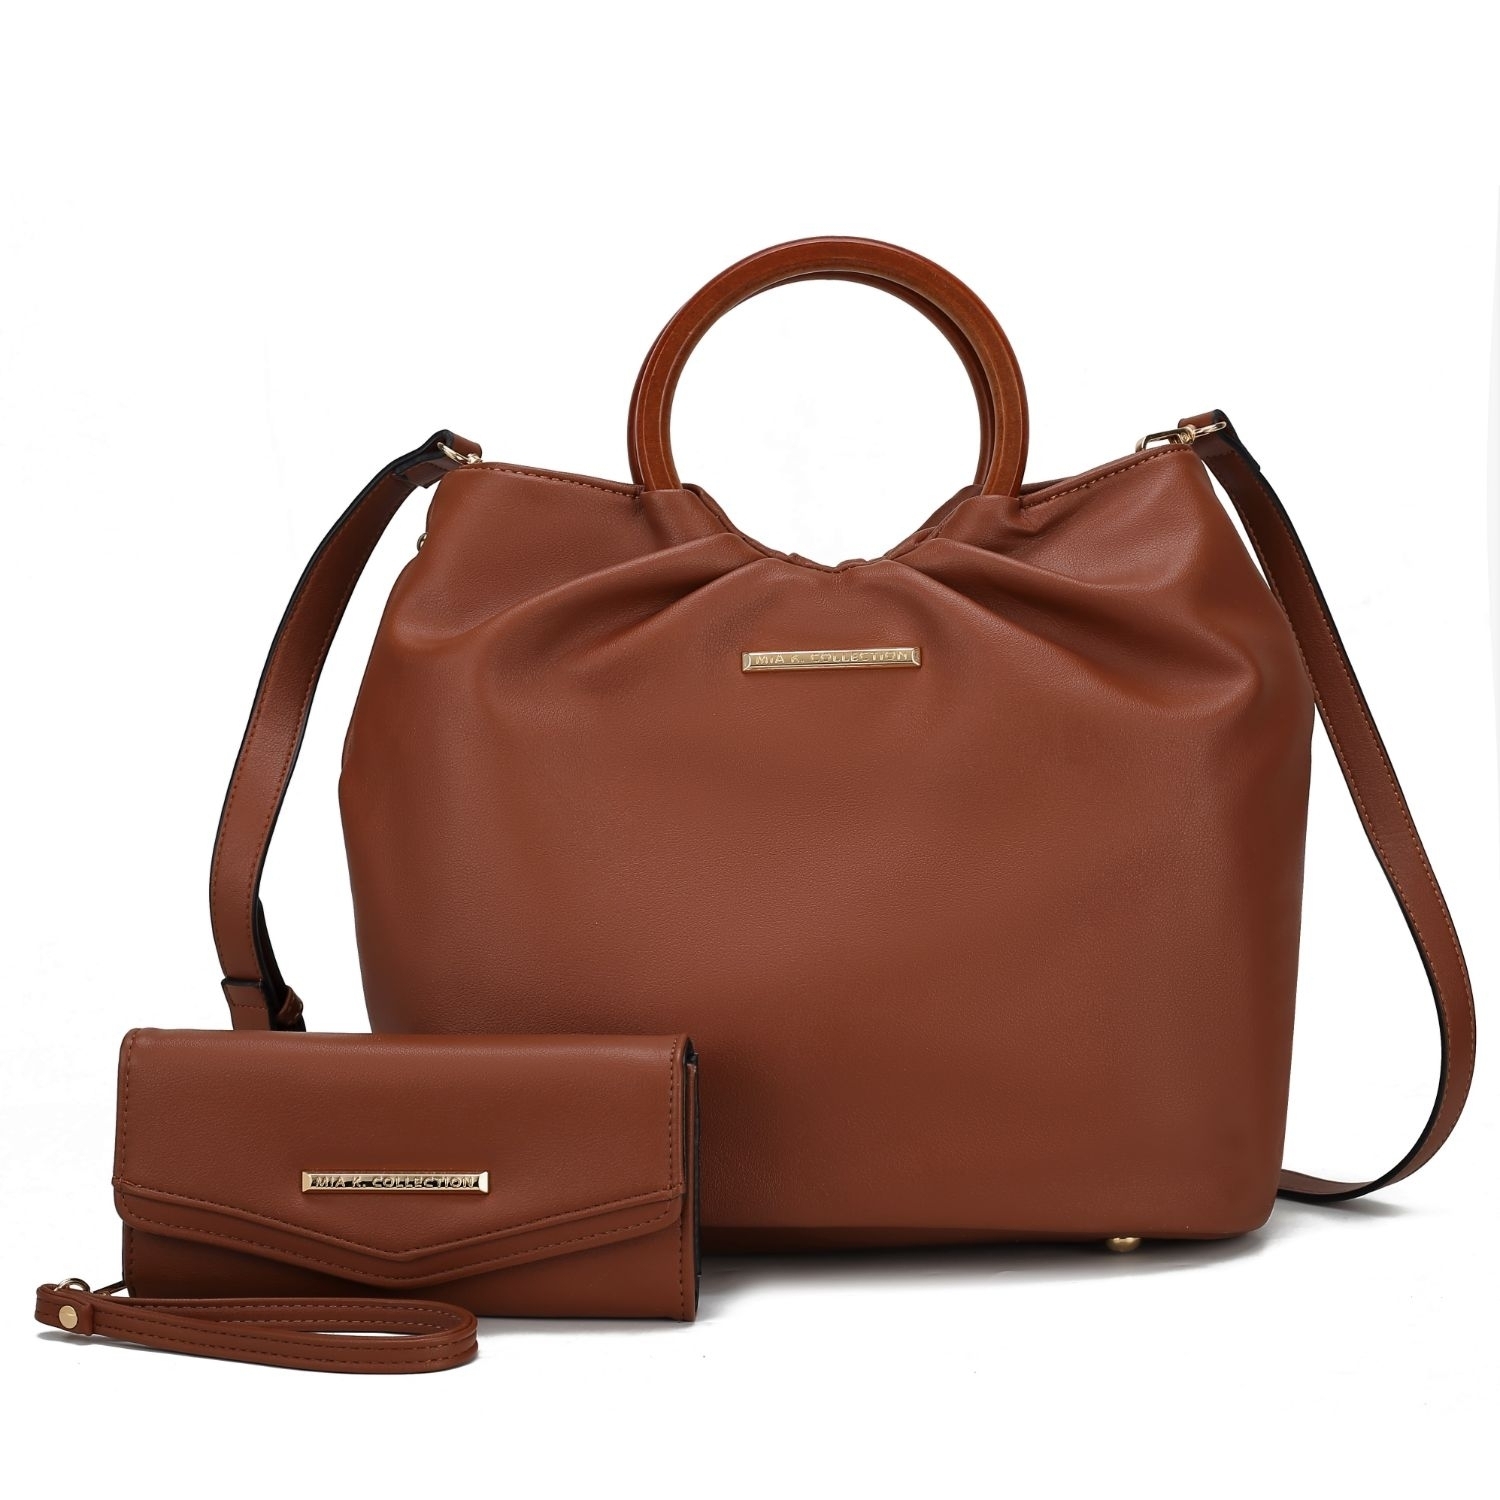 MKF Collection Leilani Vegan Leather Tote Bag With Wallet By Mia K - 2 Pieces - Cognac